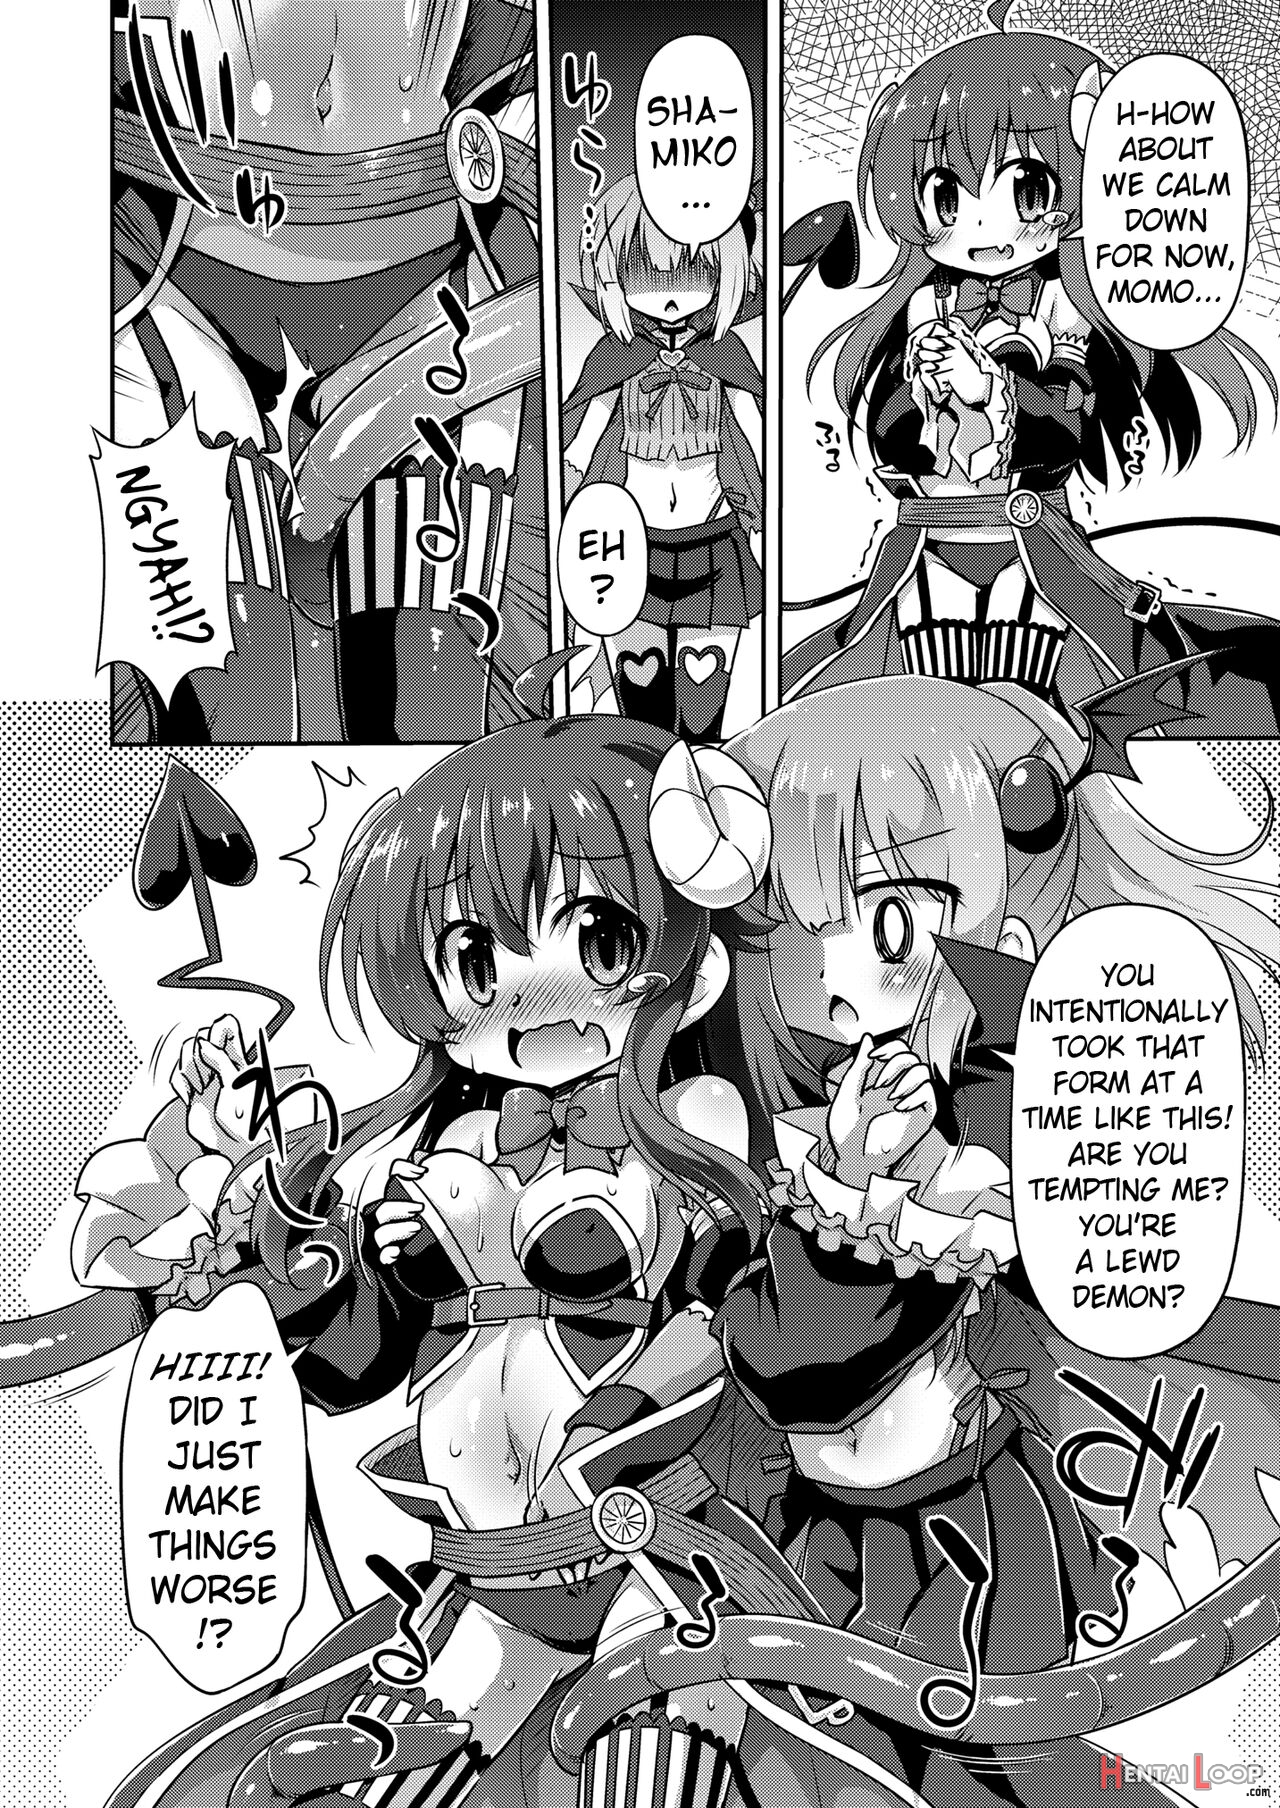 The Lewd Demon In Your Town page 5